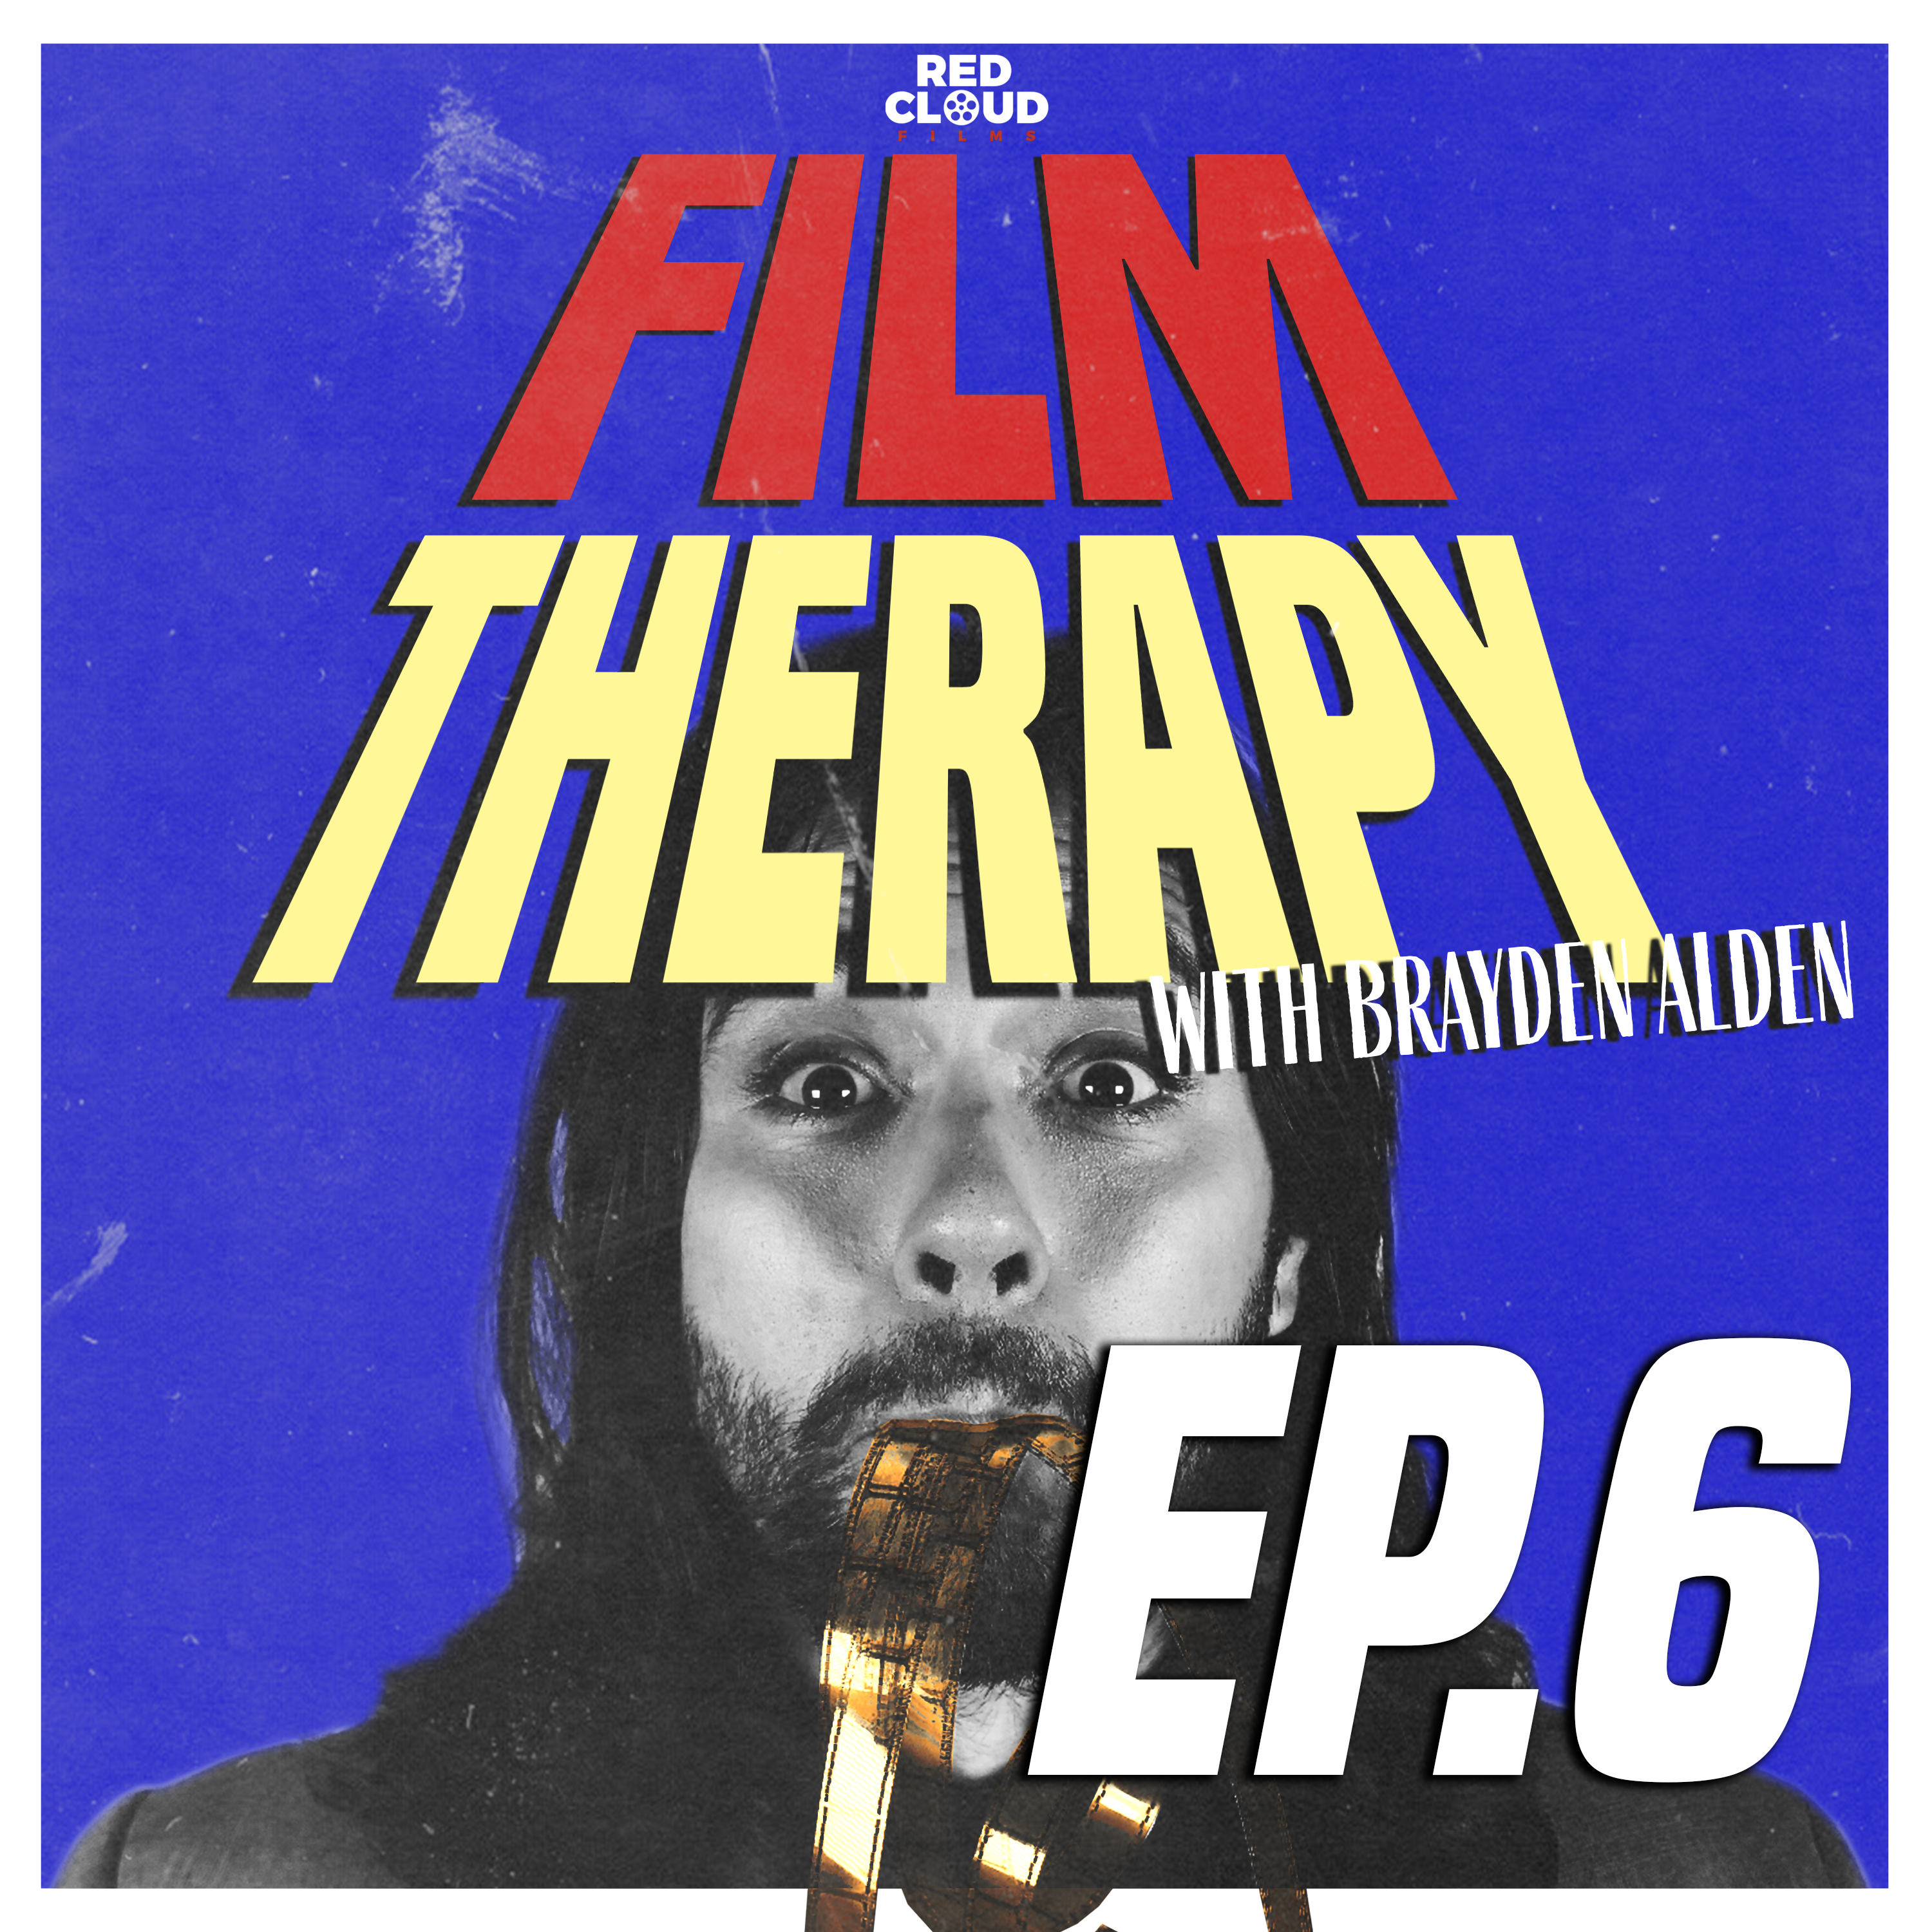 Red Cloud Films - FILM THERAPY EPISODE 1